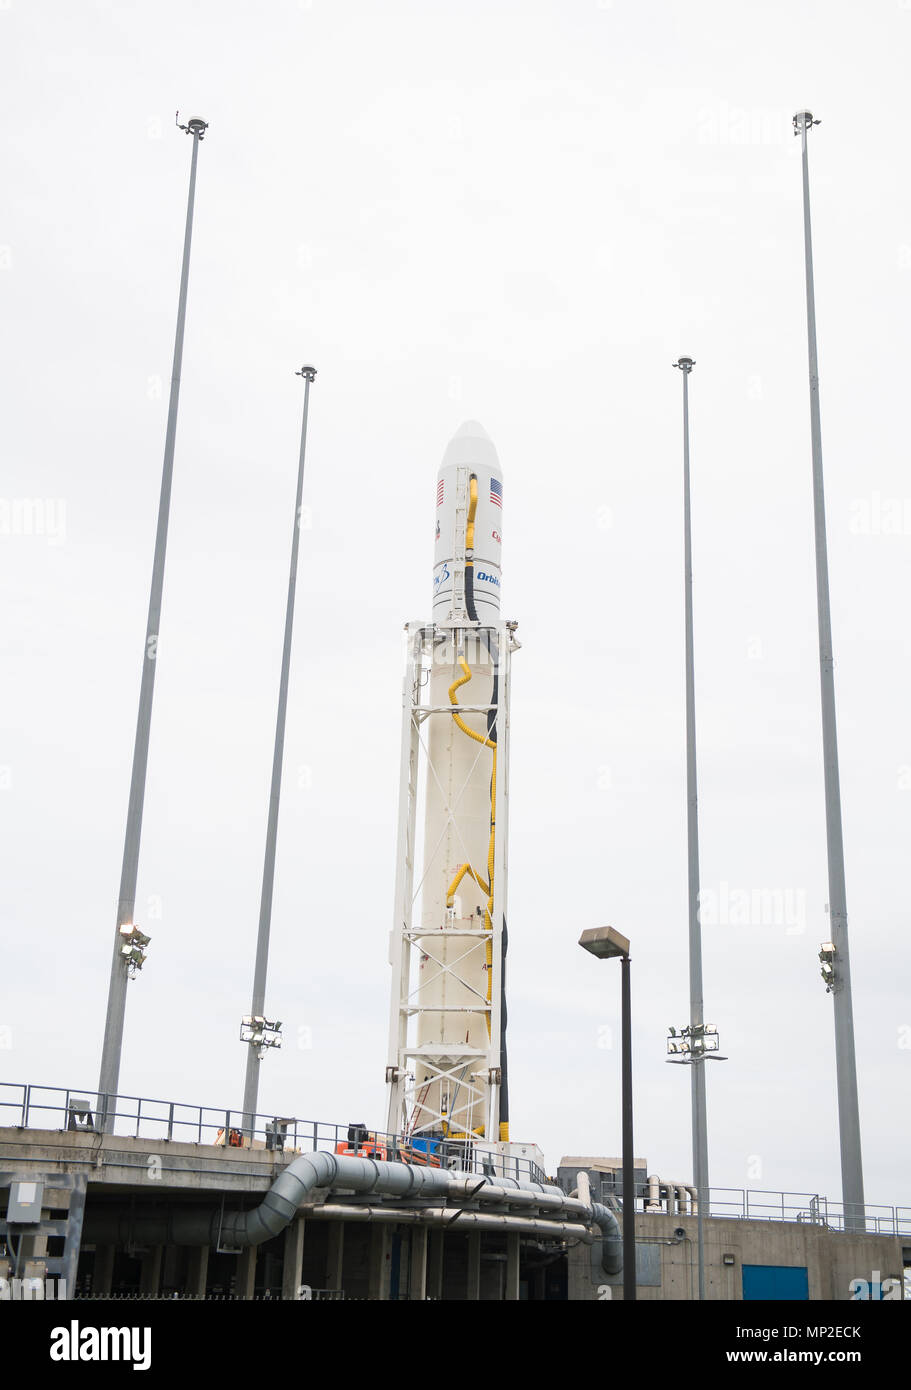 The Orbital ATK Antares rocket, with the Cygnus spacecraft onboard, is positioned on launch Pad-0A, early at Wallops Flight Facility May 19, 2018 in Wallops, Virginia. The Antares will carry the Cygnus spacecraft filled with 7,400 pounds of cargo for the International Space Station on May 21st. Stock Photo